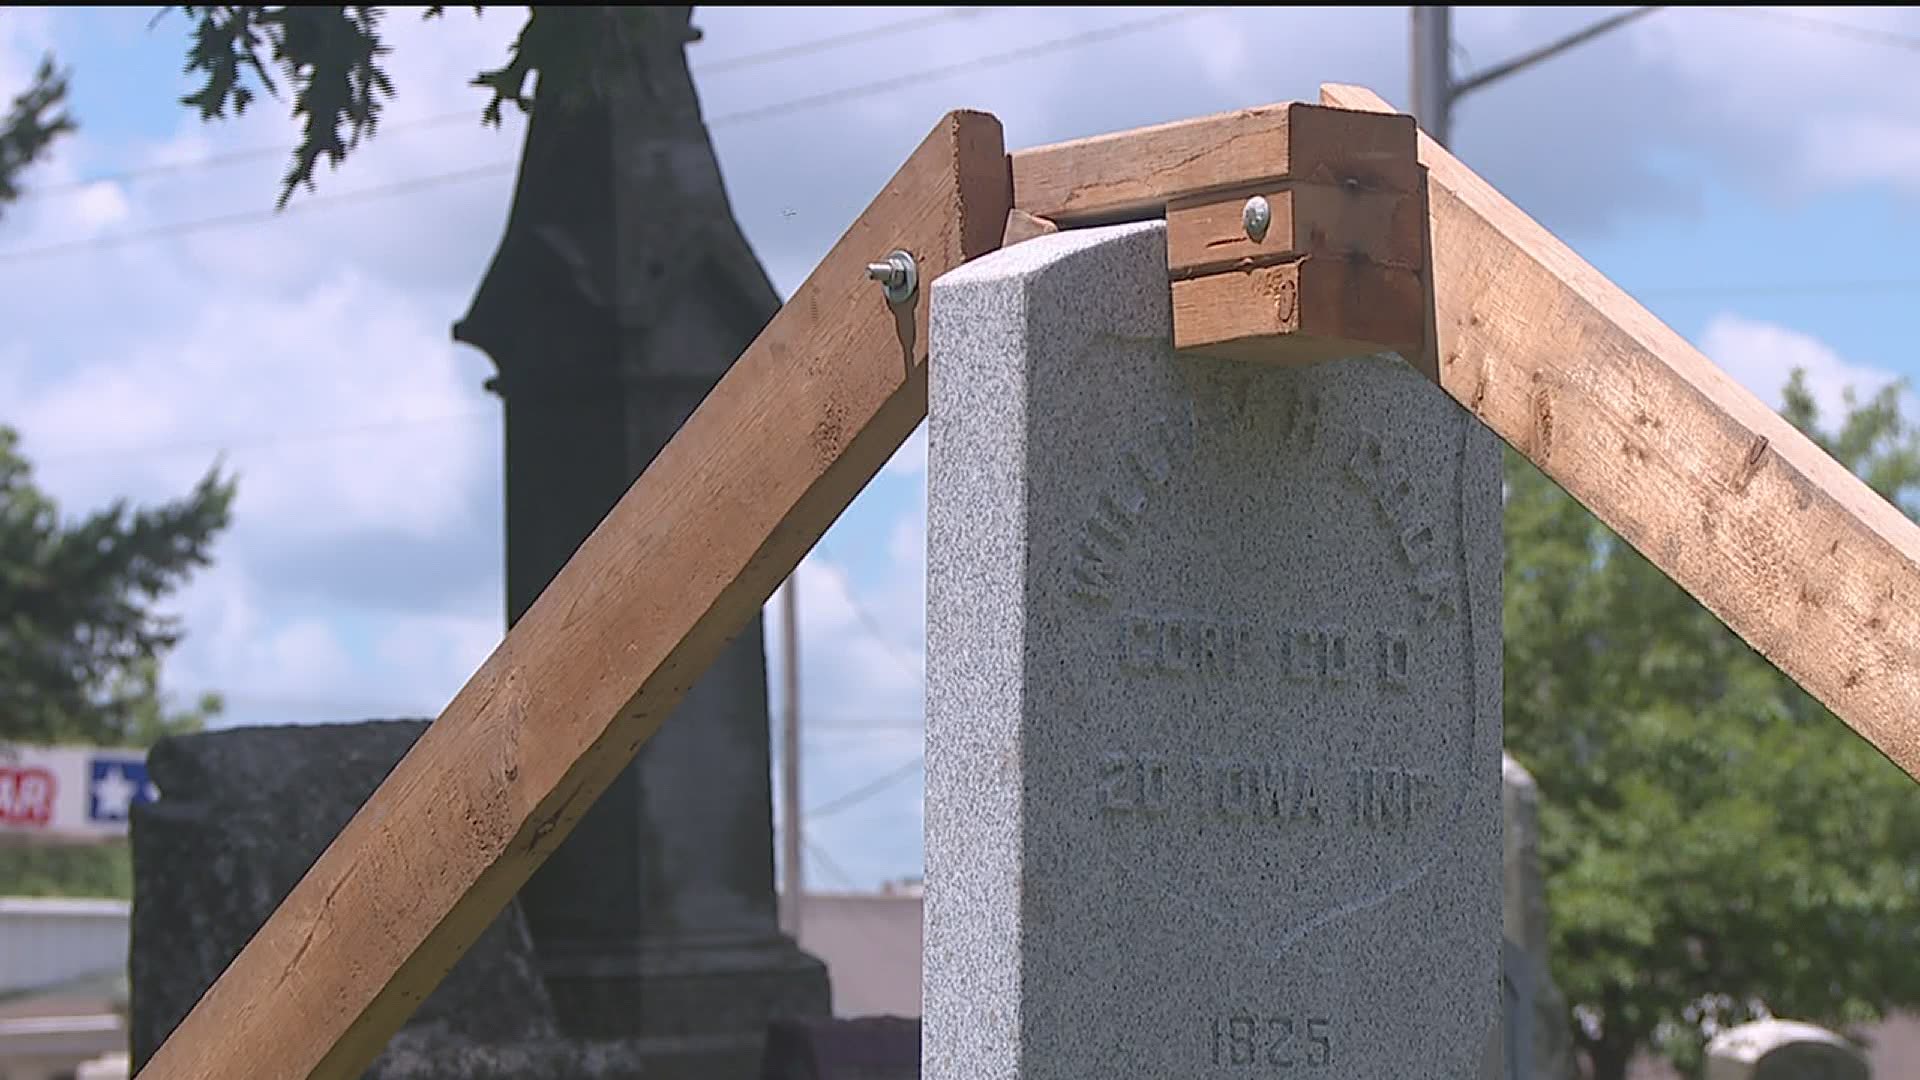 The new headstone was erected at Davenport City Cemetery, the oldest in Scott County